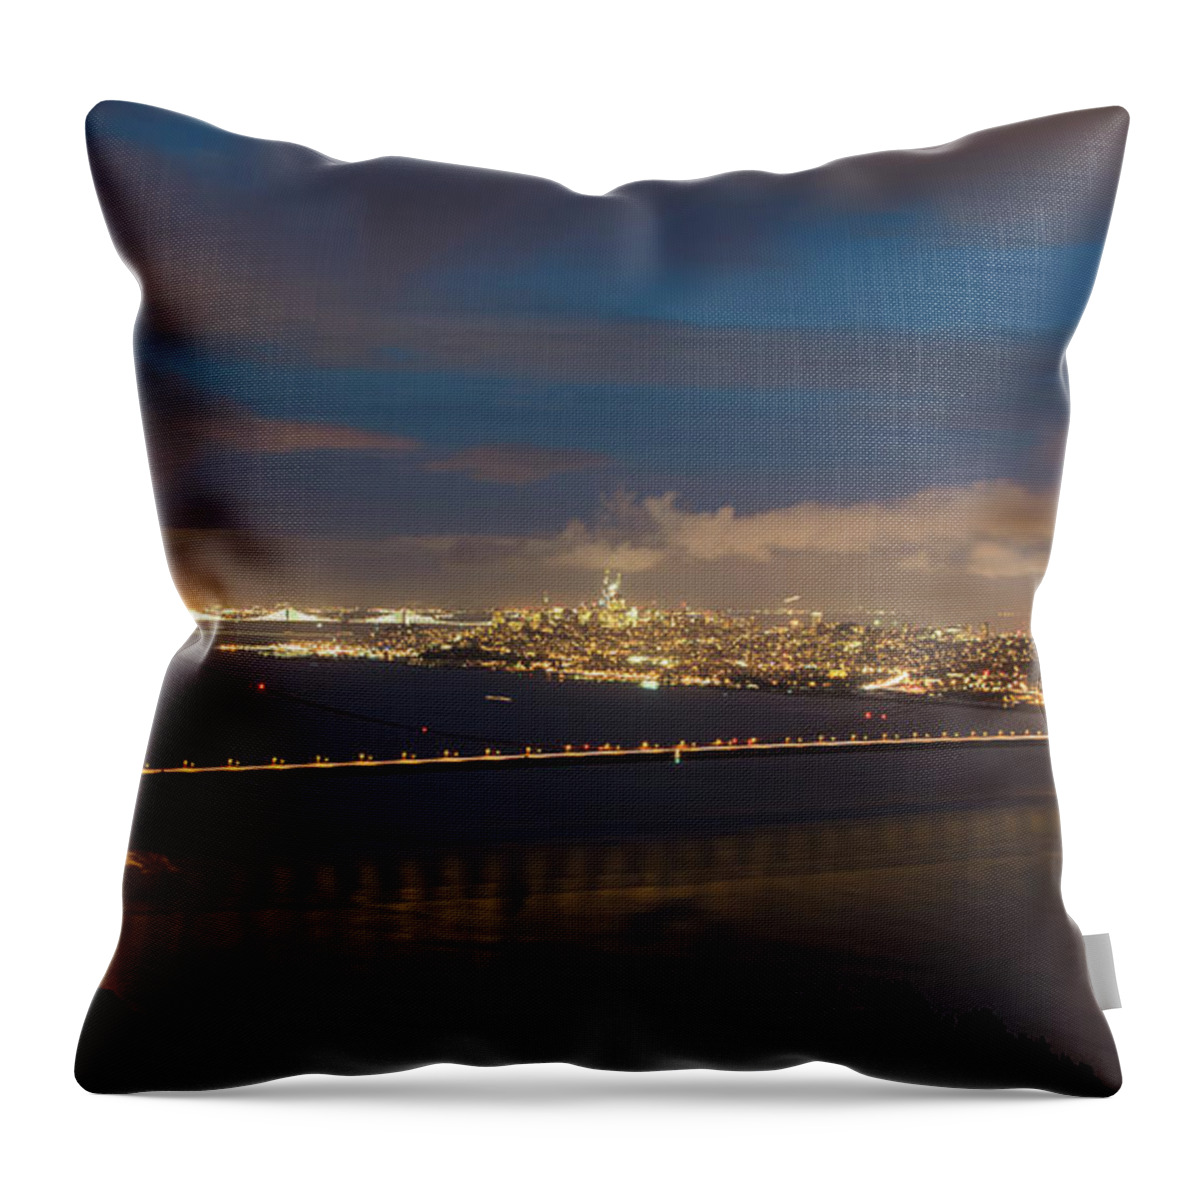 San Francisco Throw Pillow featuring the photograph City And The Bridge by Stephen Holst